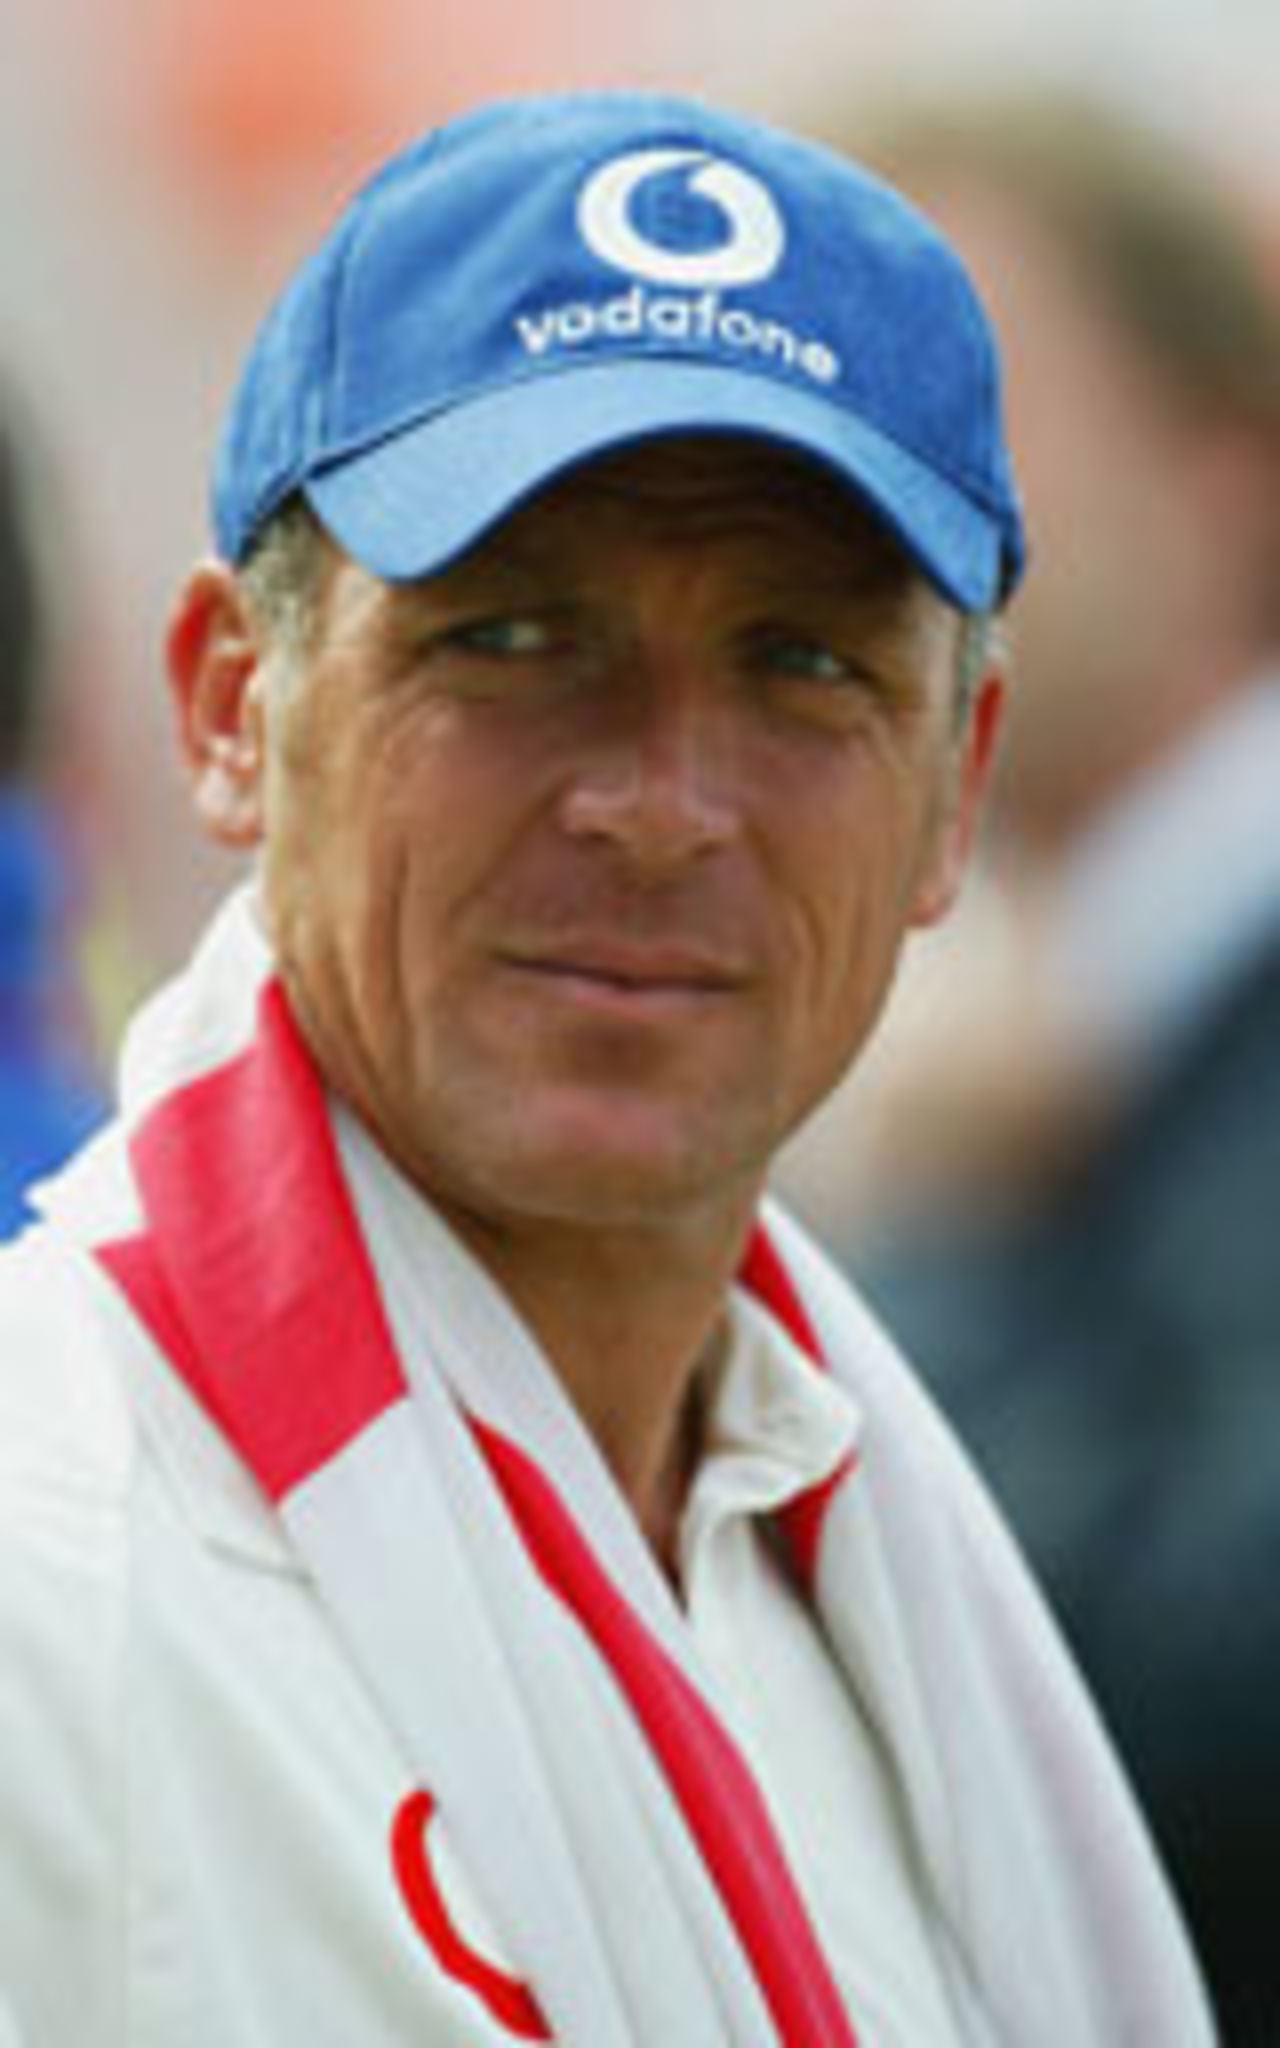 Alec Stewart with England flag round his neck, The Oval, September 8, 2003